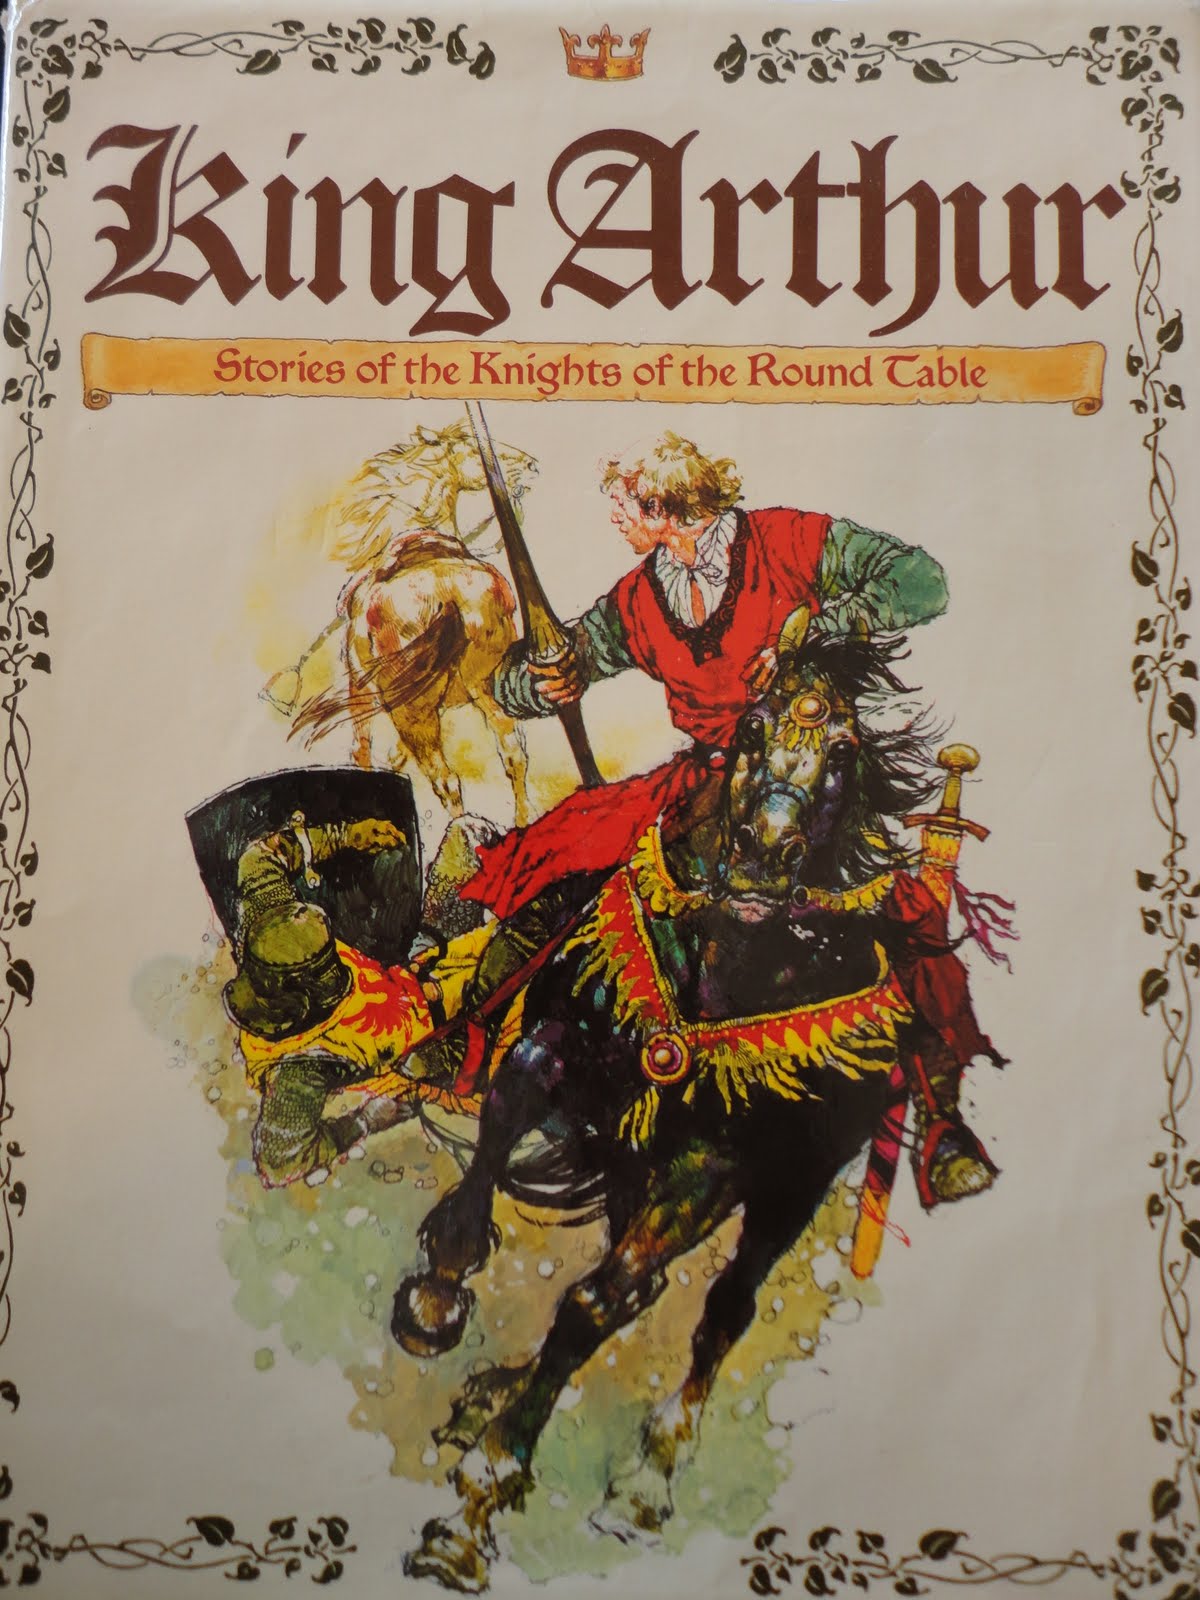 Рыцари короля артура книга. King Arthur книга. King Arthur and the Knights of the Round Table book.